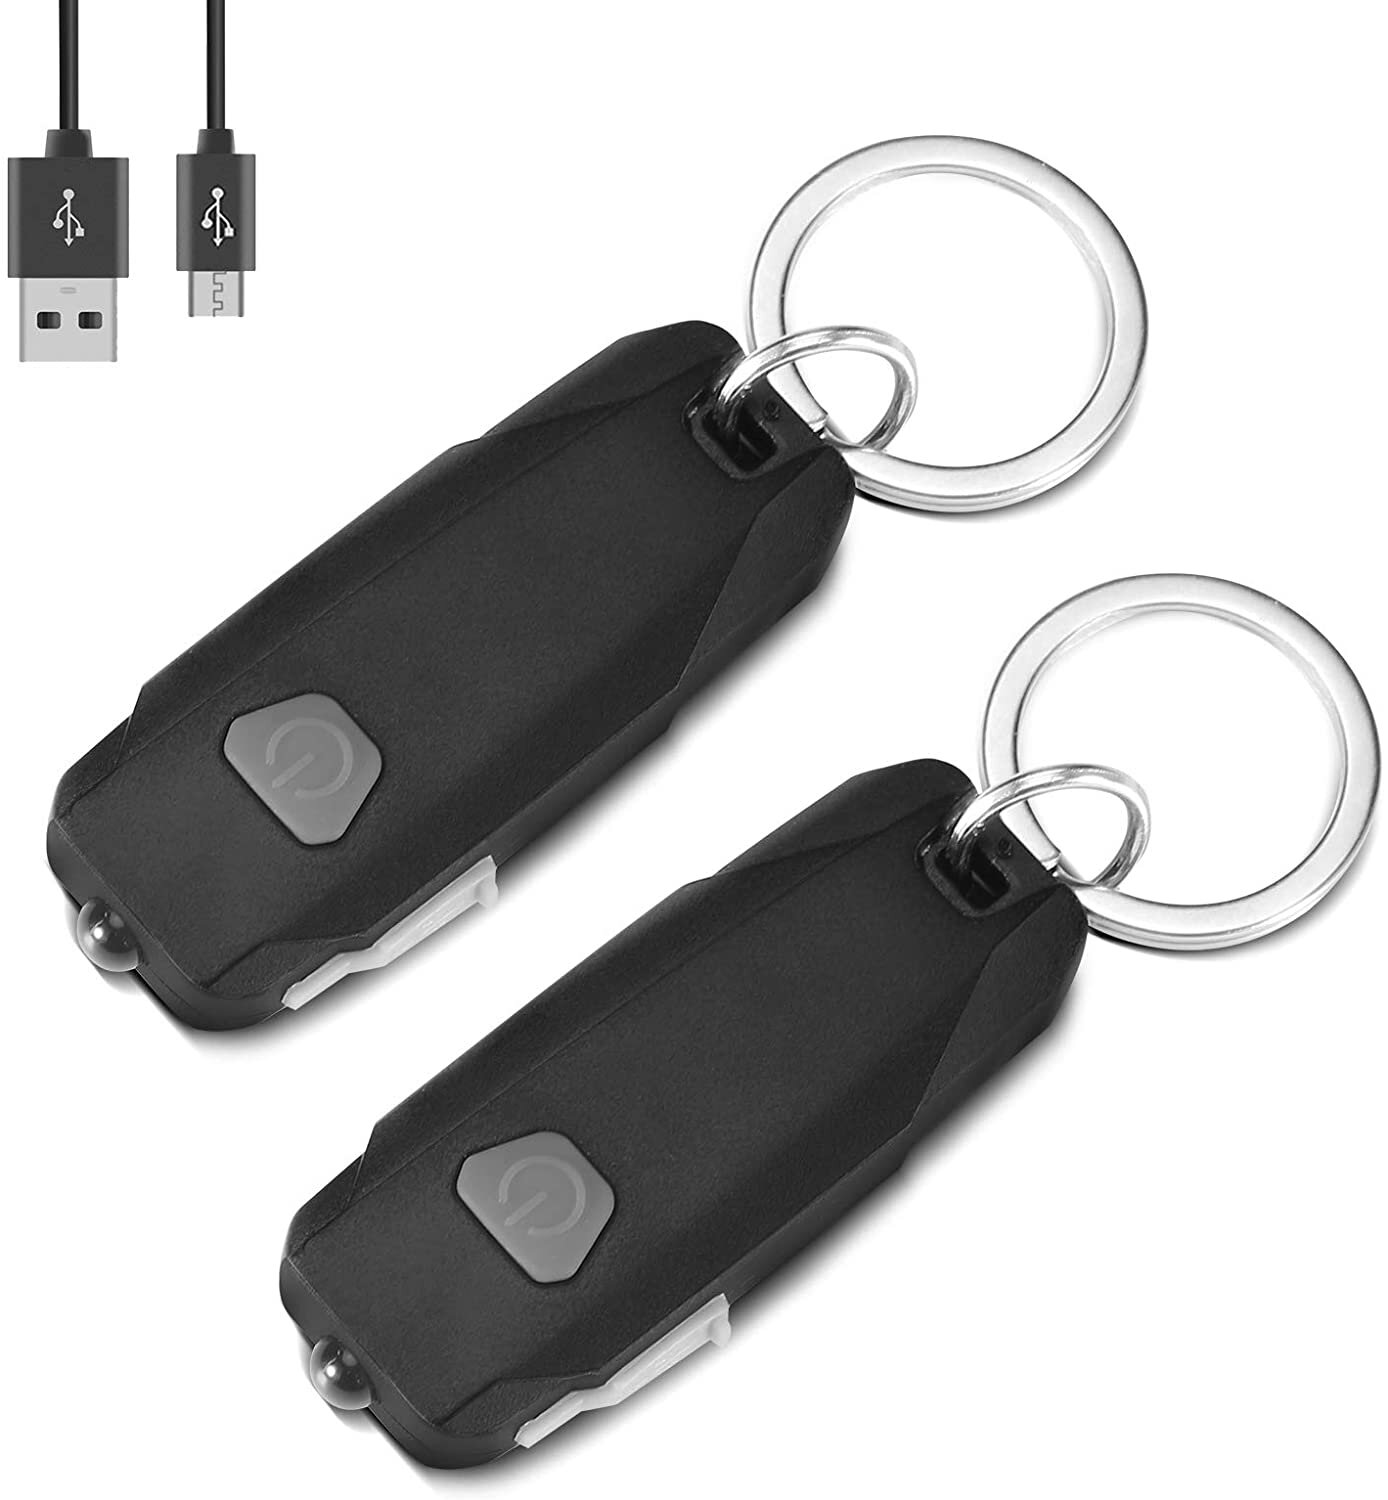 MECO 2 Pack Mini Led Lights, Portable USB Rechargeable Ultra Bright Keychain Flashlight with 2 Level Brightness Key Ring